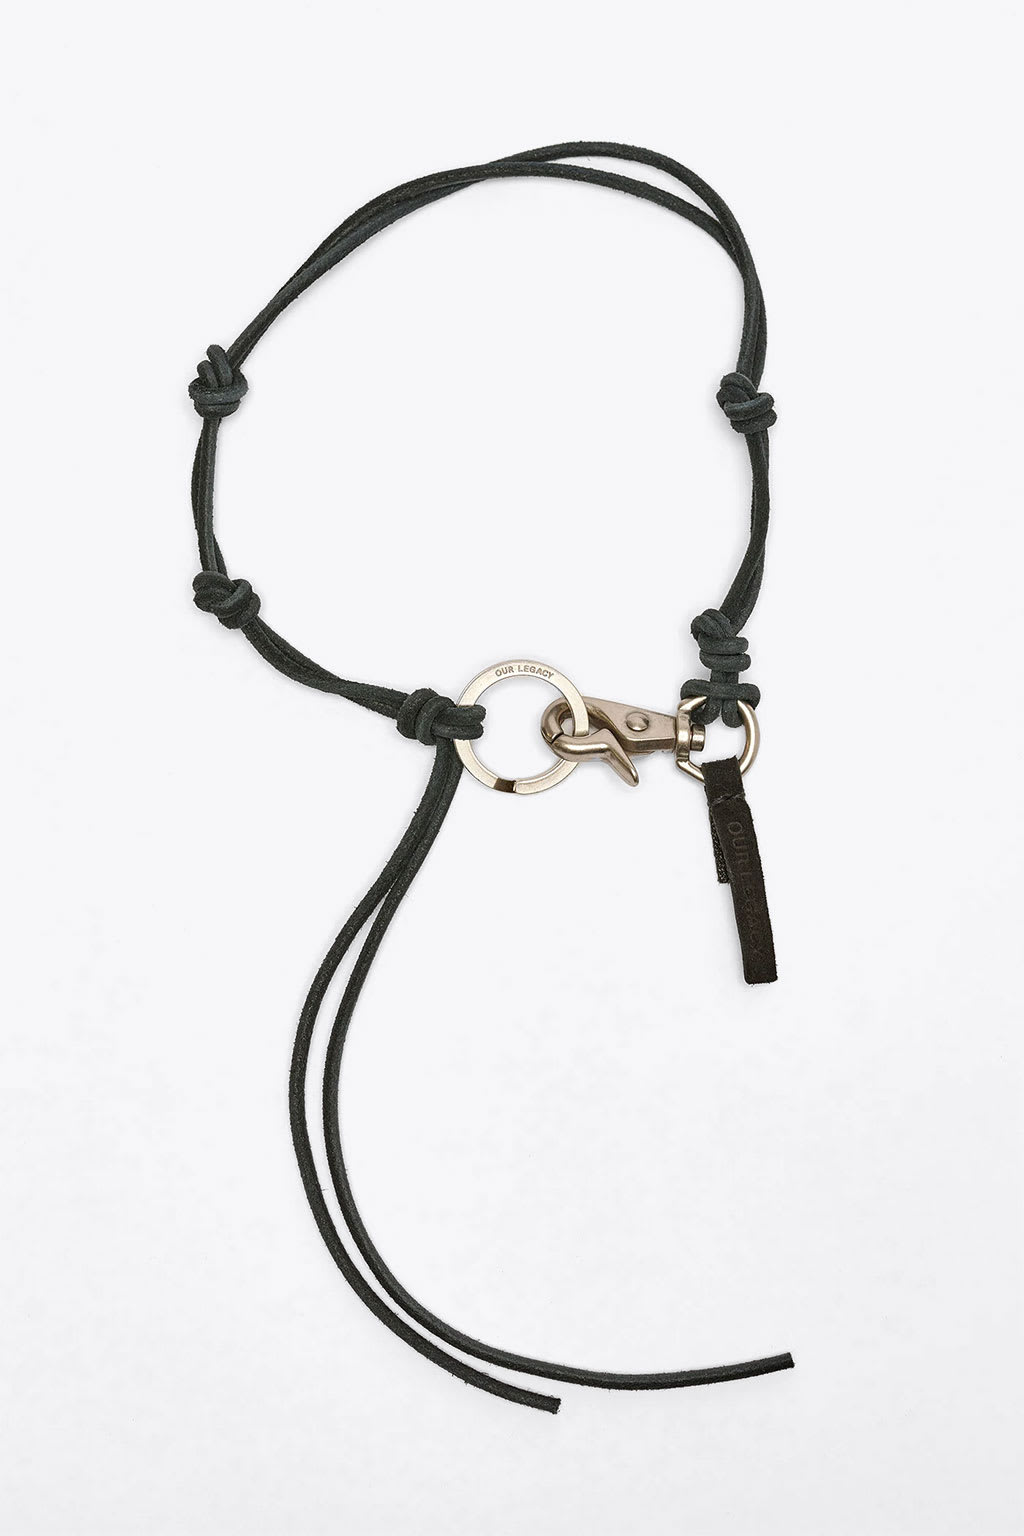 Ladon Black knotted leather cord key chain - Ladon